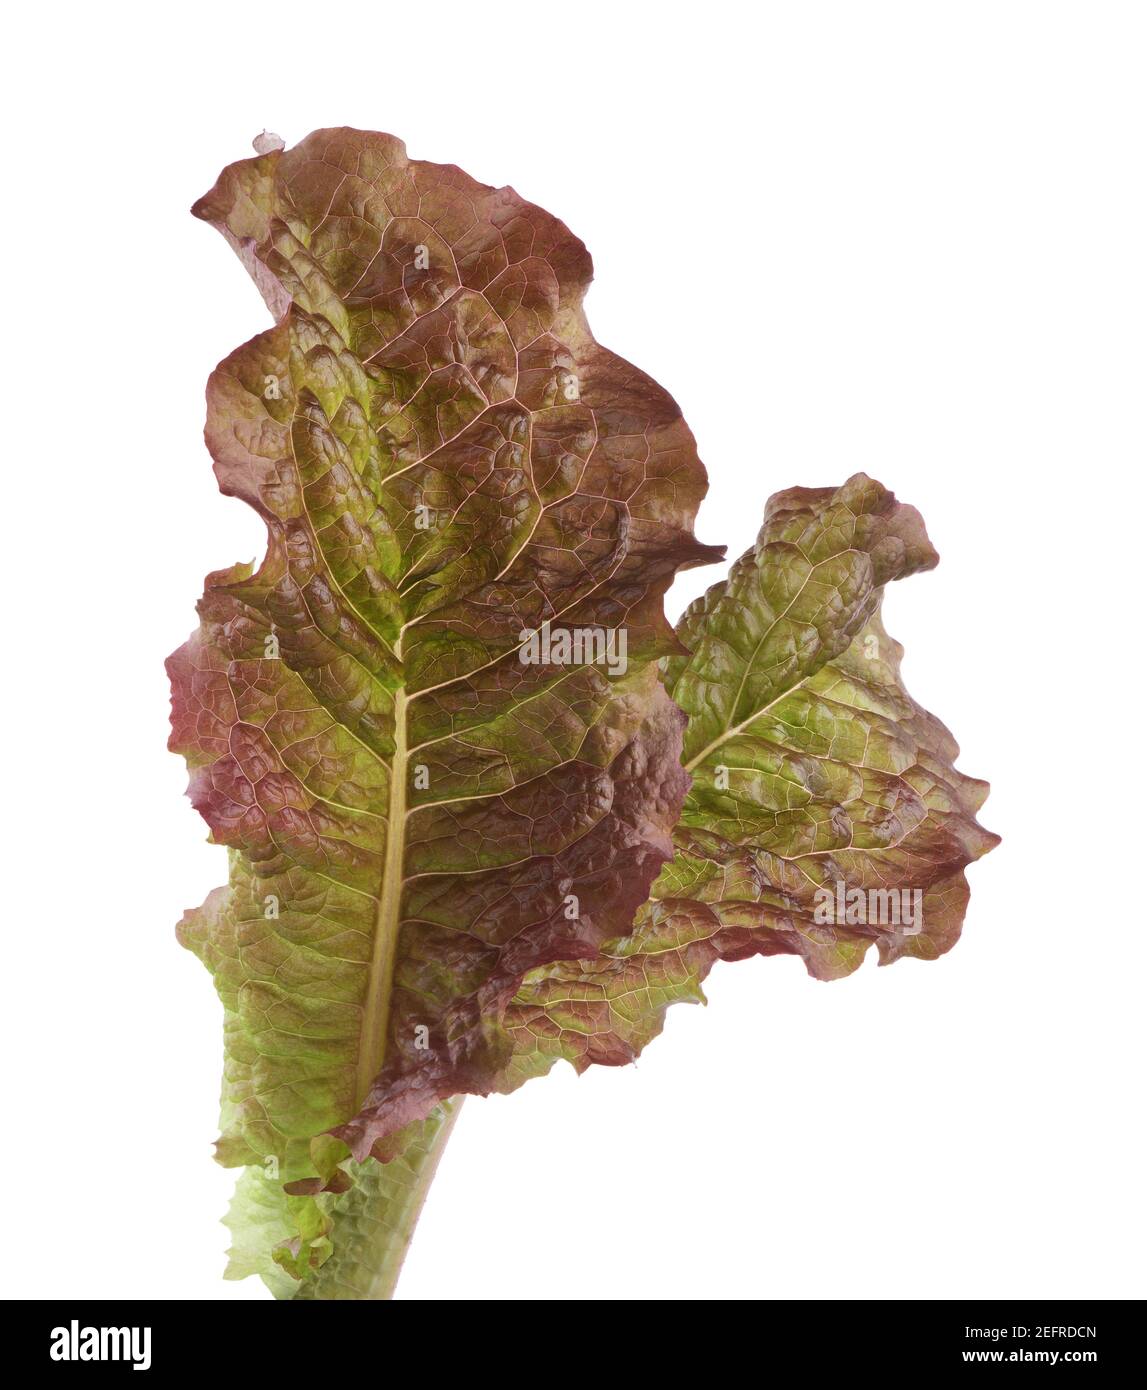 Two leaves of Red Flame lettuce, organically grown Lactuca sativa, Flame Red or Red Fire non-GMO variety. Isolated closeup on white studio background. Stock Photo